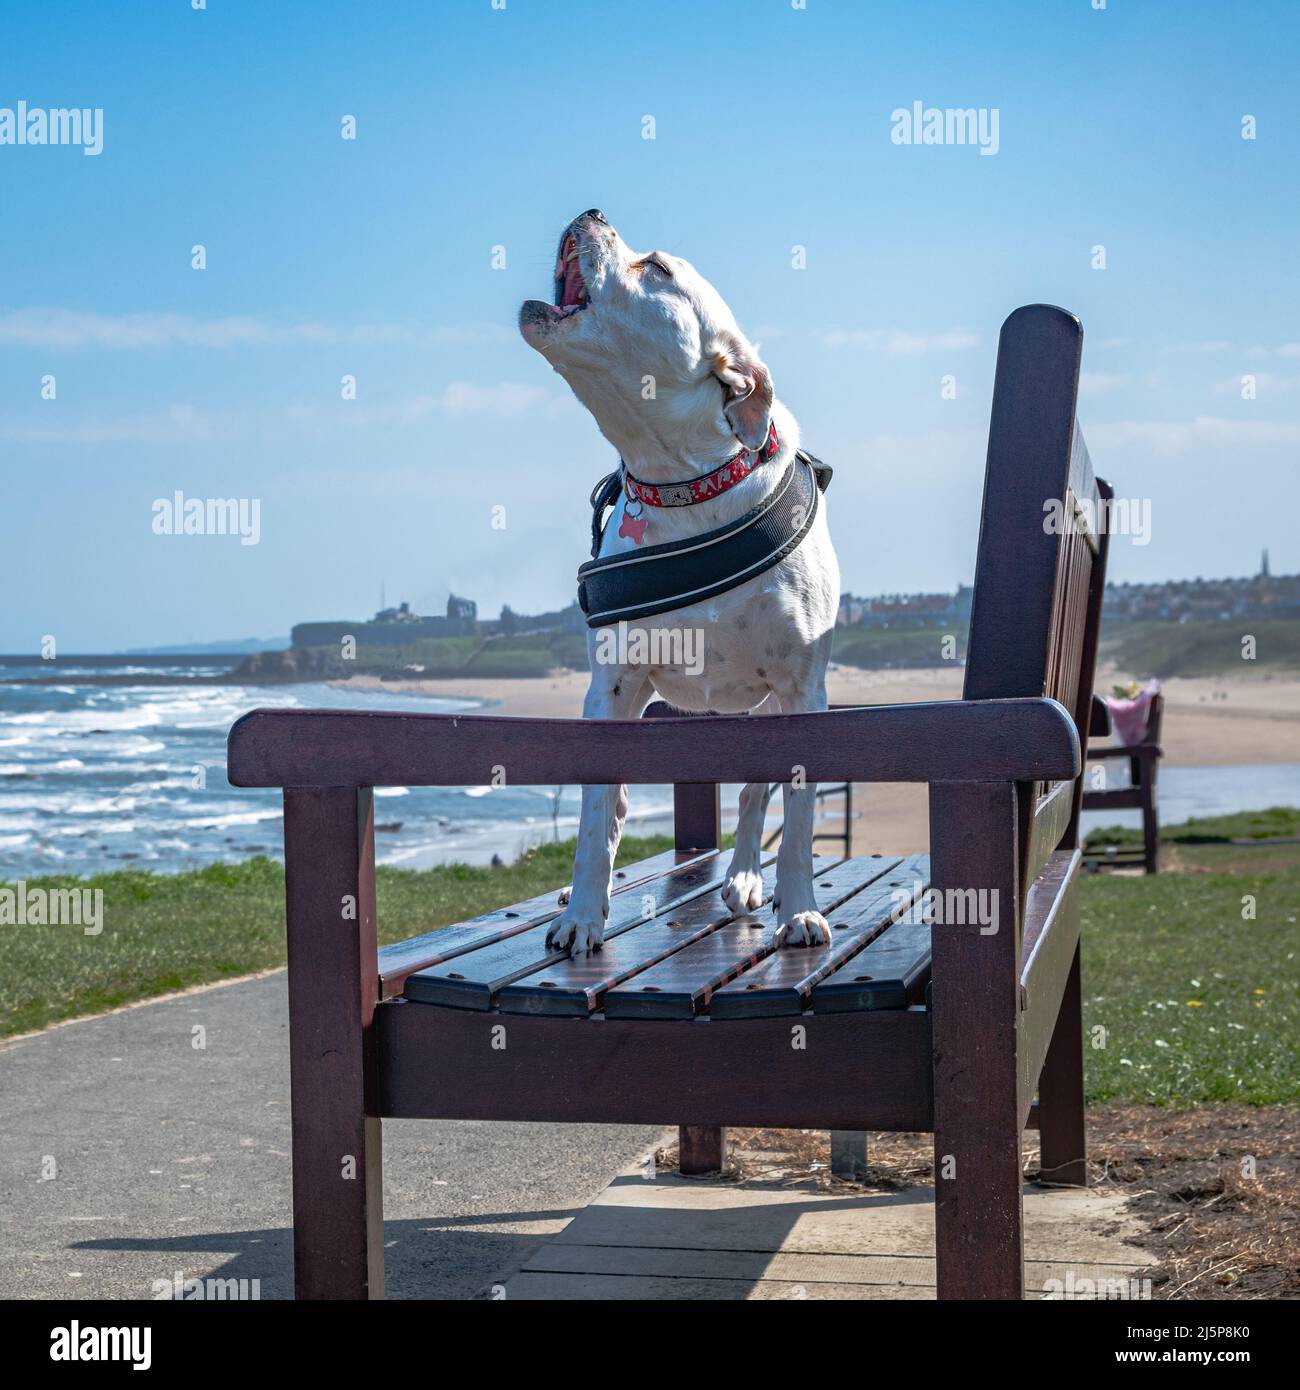 White Staffordshire Bull Terrier mix dog howling whilst standing on a bench on the sea front at Tynemouth Beach North Tyneside Stock Photo